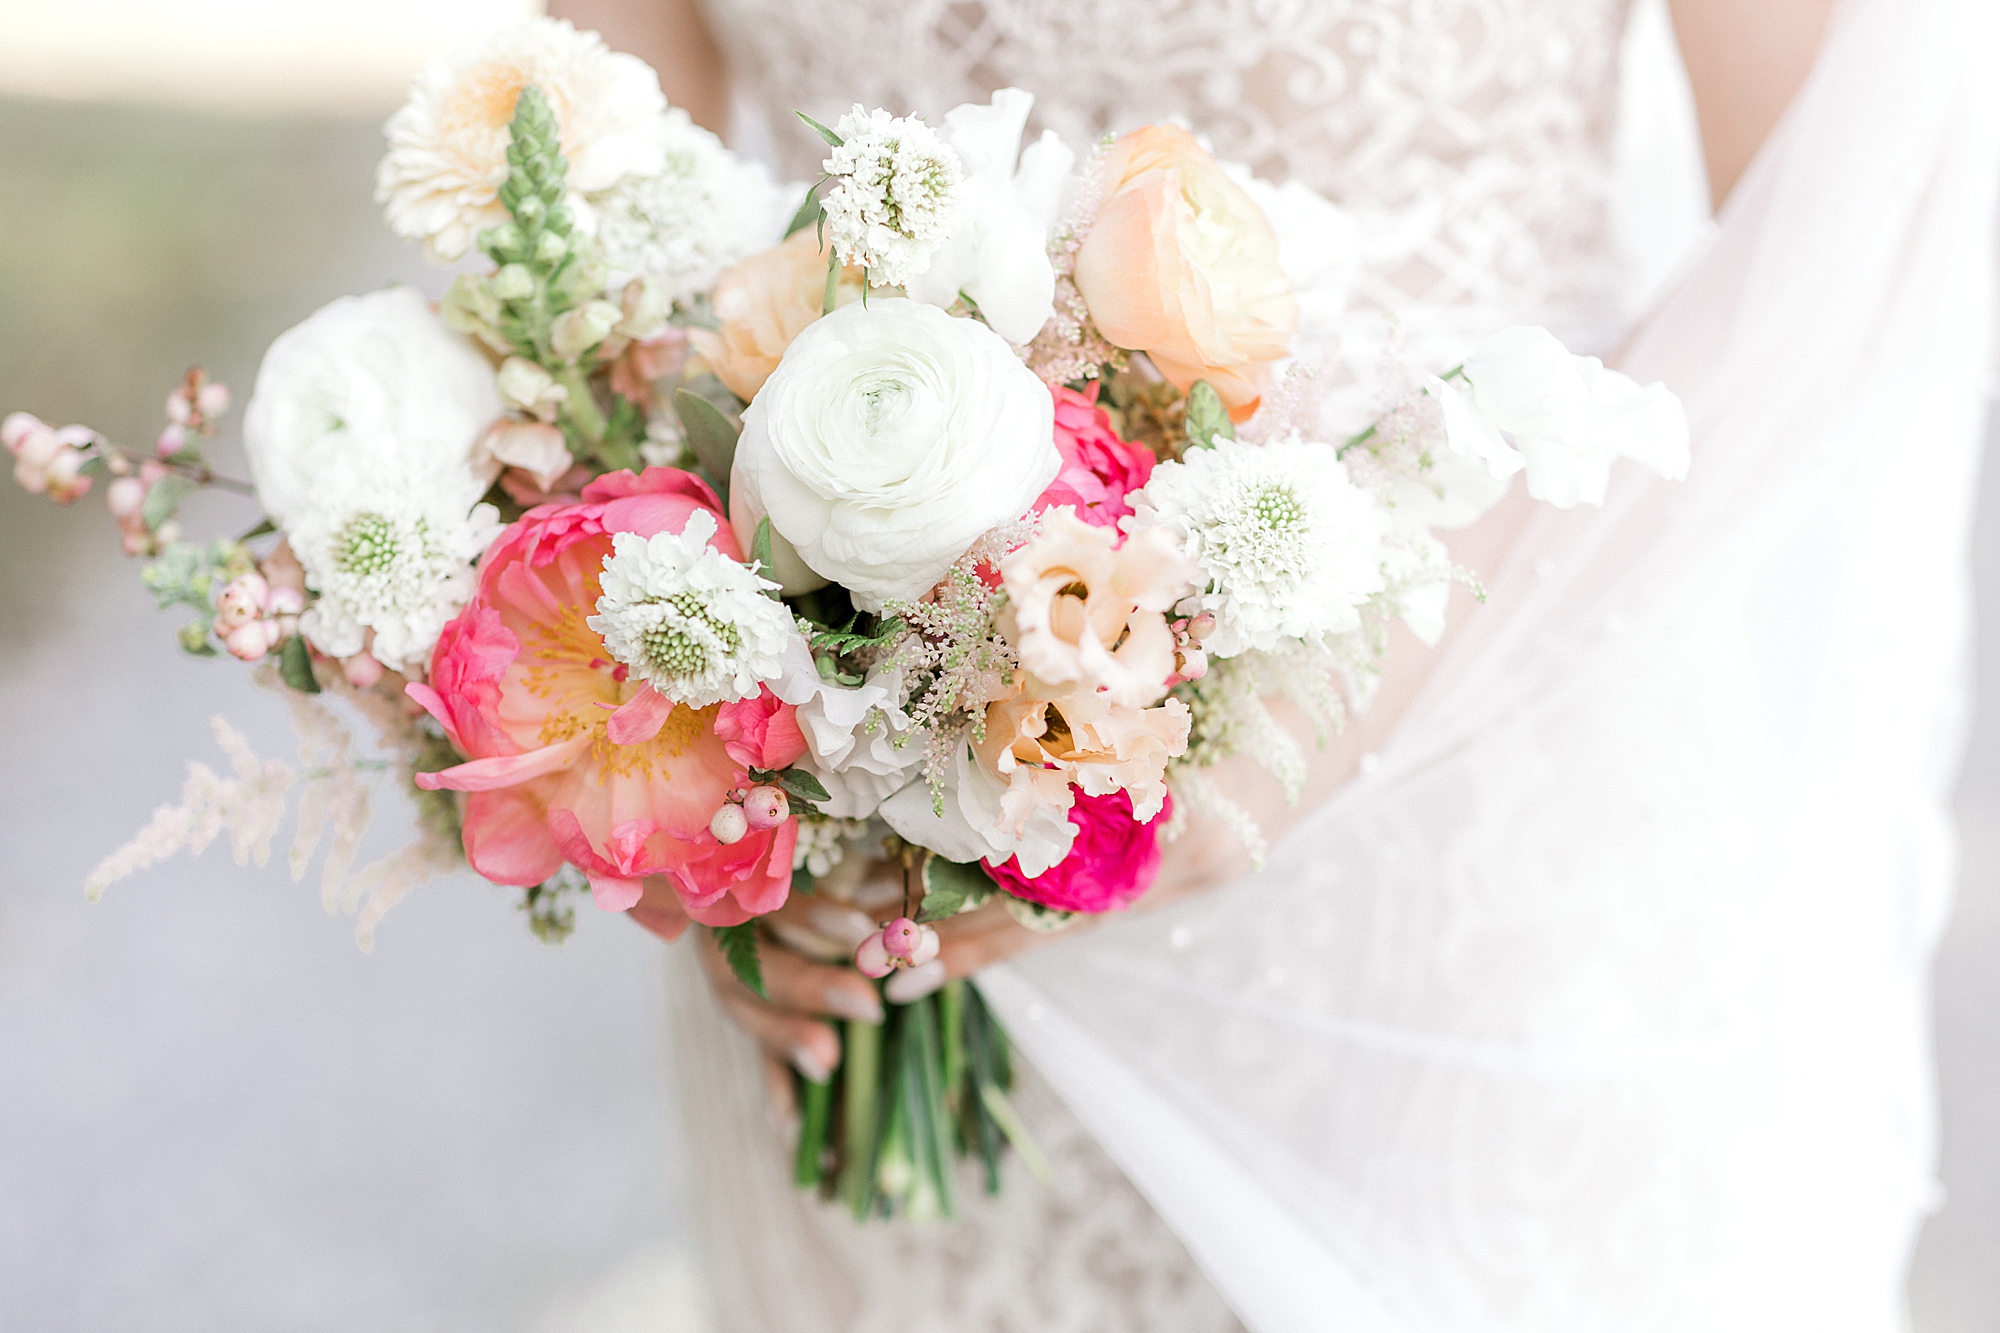 bride's bouquet for summer wedding with white and pink flowers